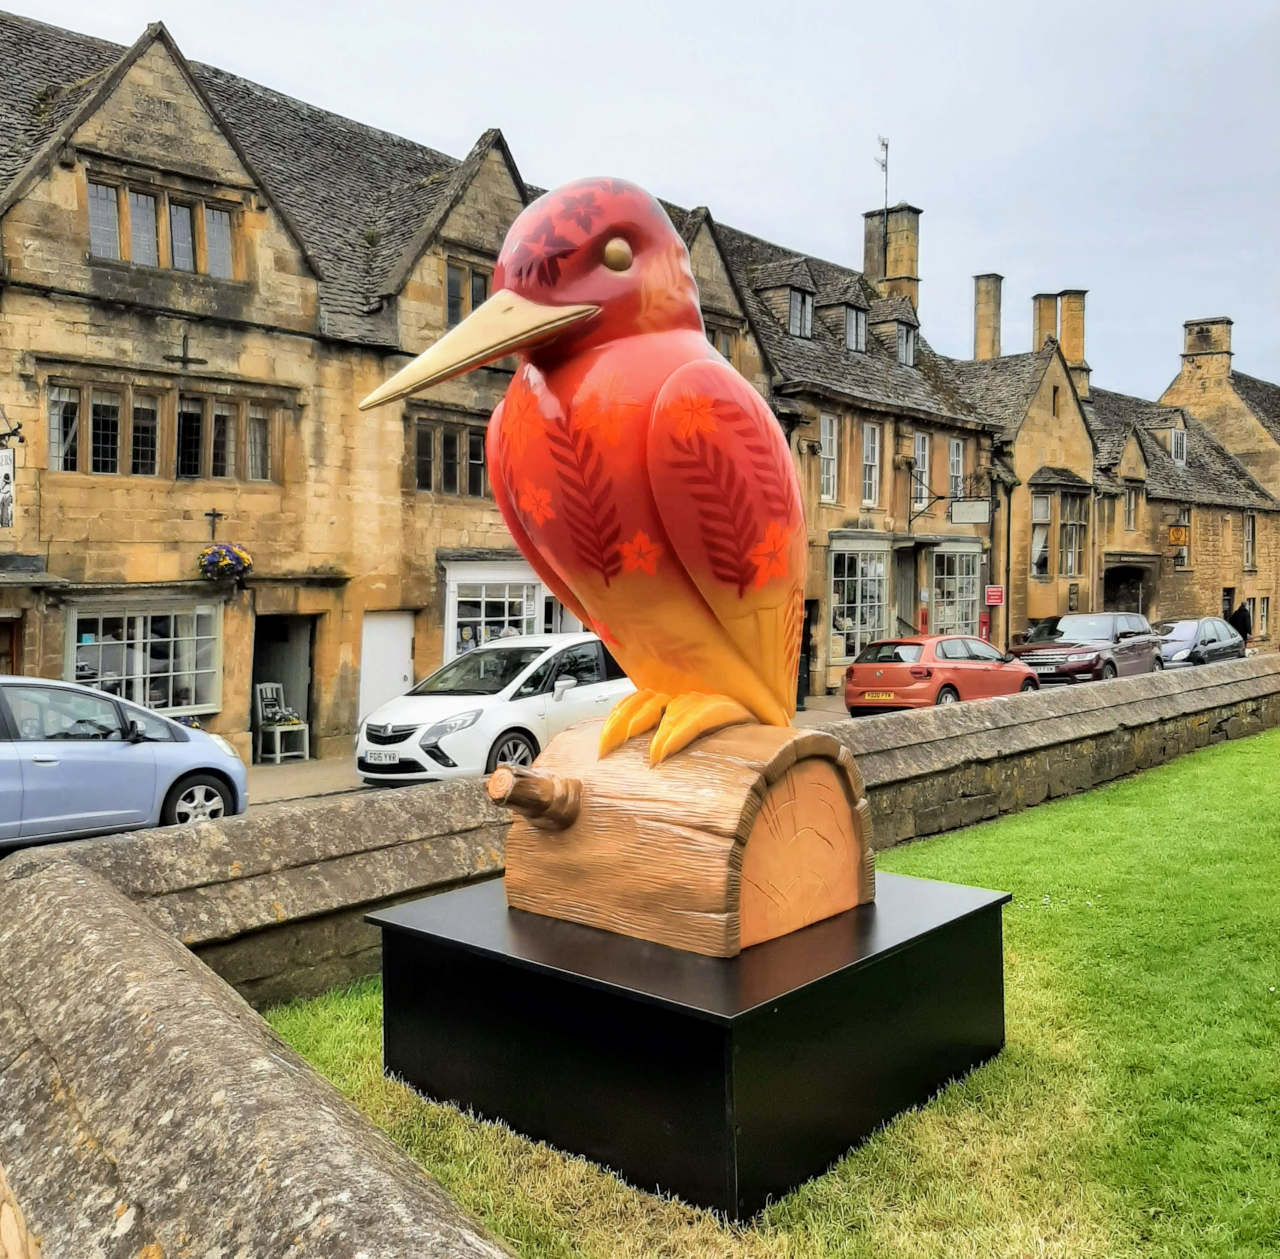 The Cotswolds Kingfisher Trail starts in Chipping Campden